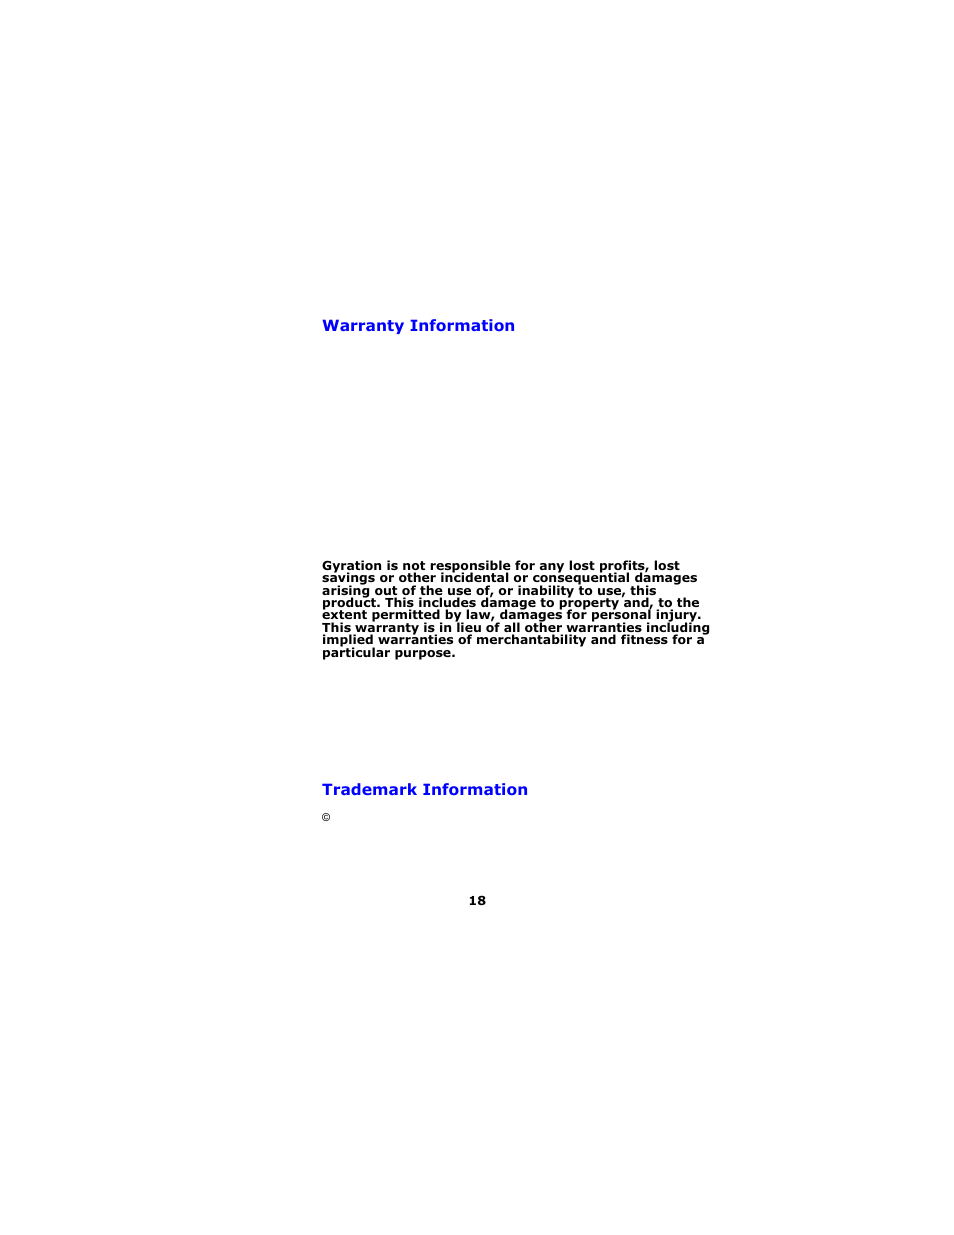 Warranty information, Trademark information | Gyration TM ULTRA CORDLESS OPTICAL MOUSE User Manual | Page 21 / 22